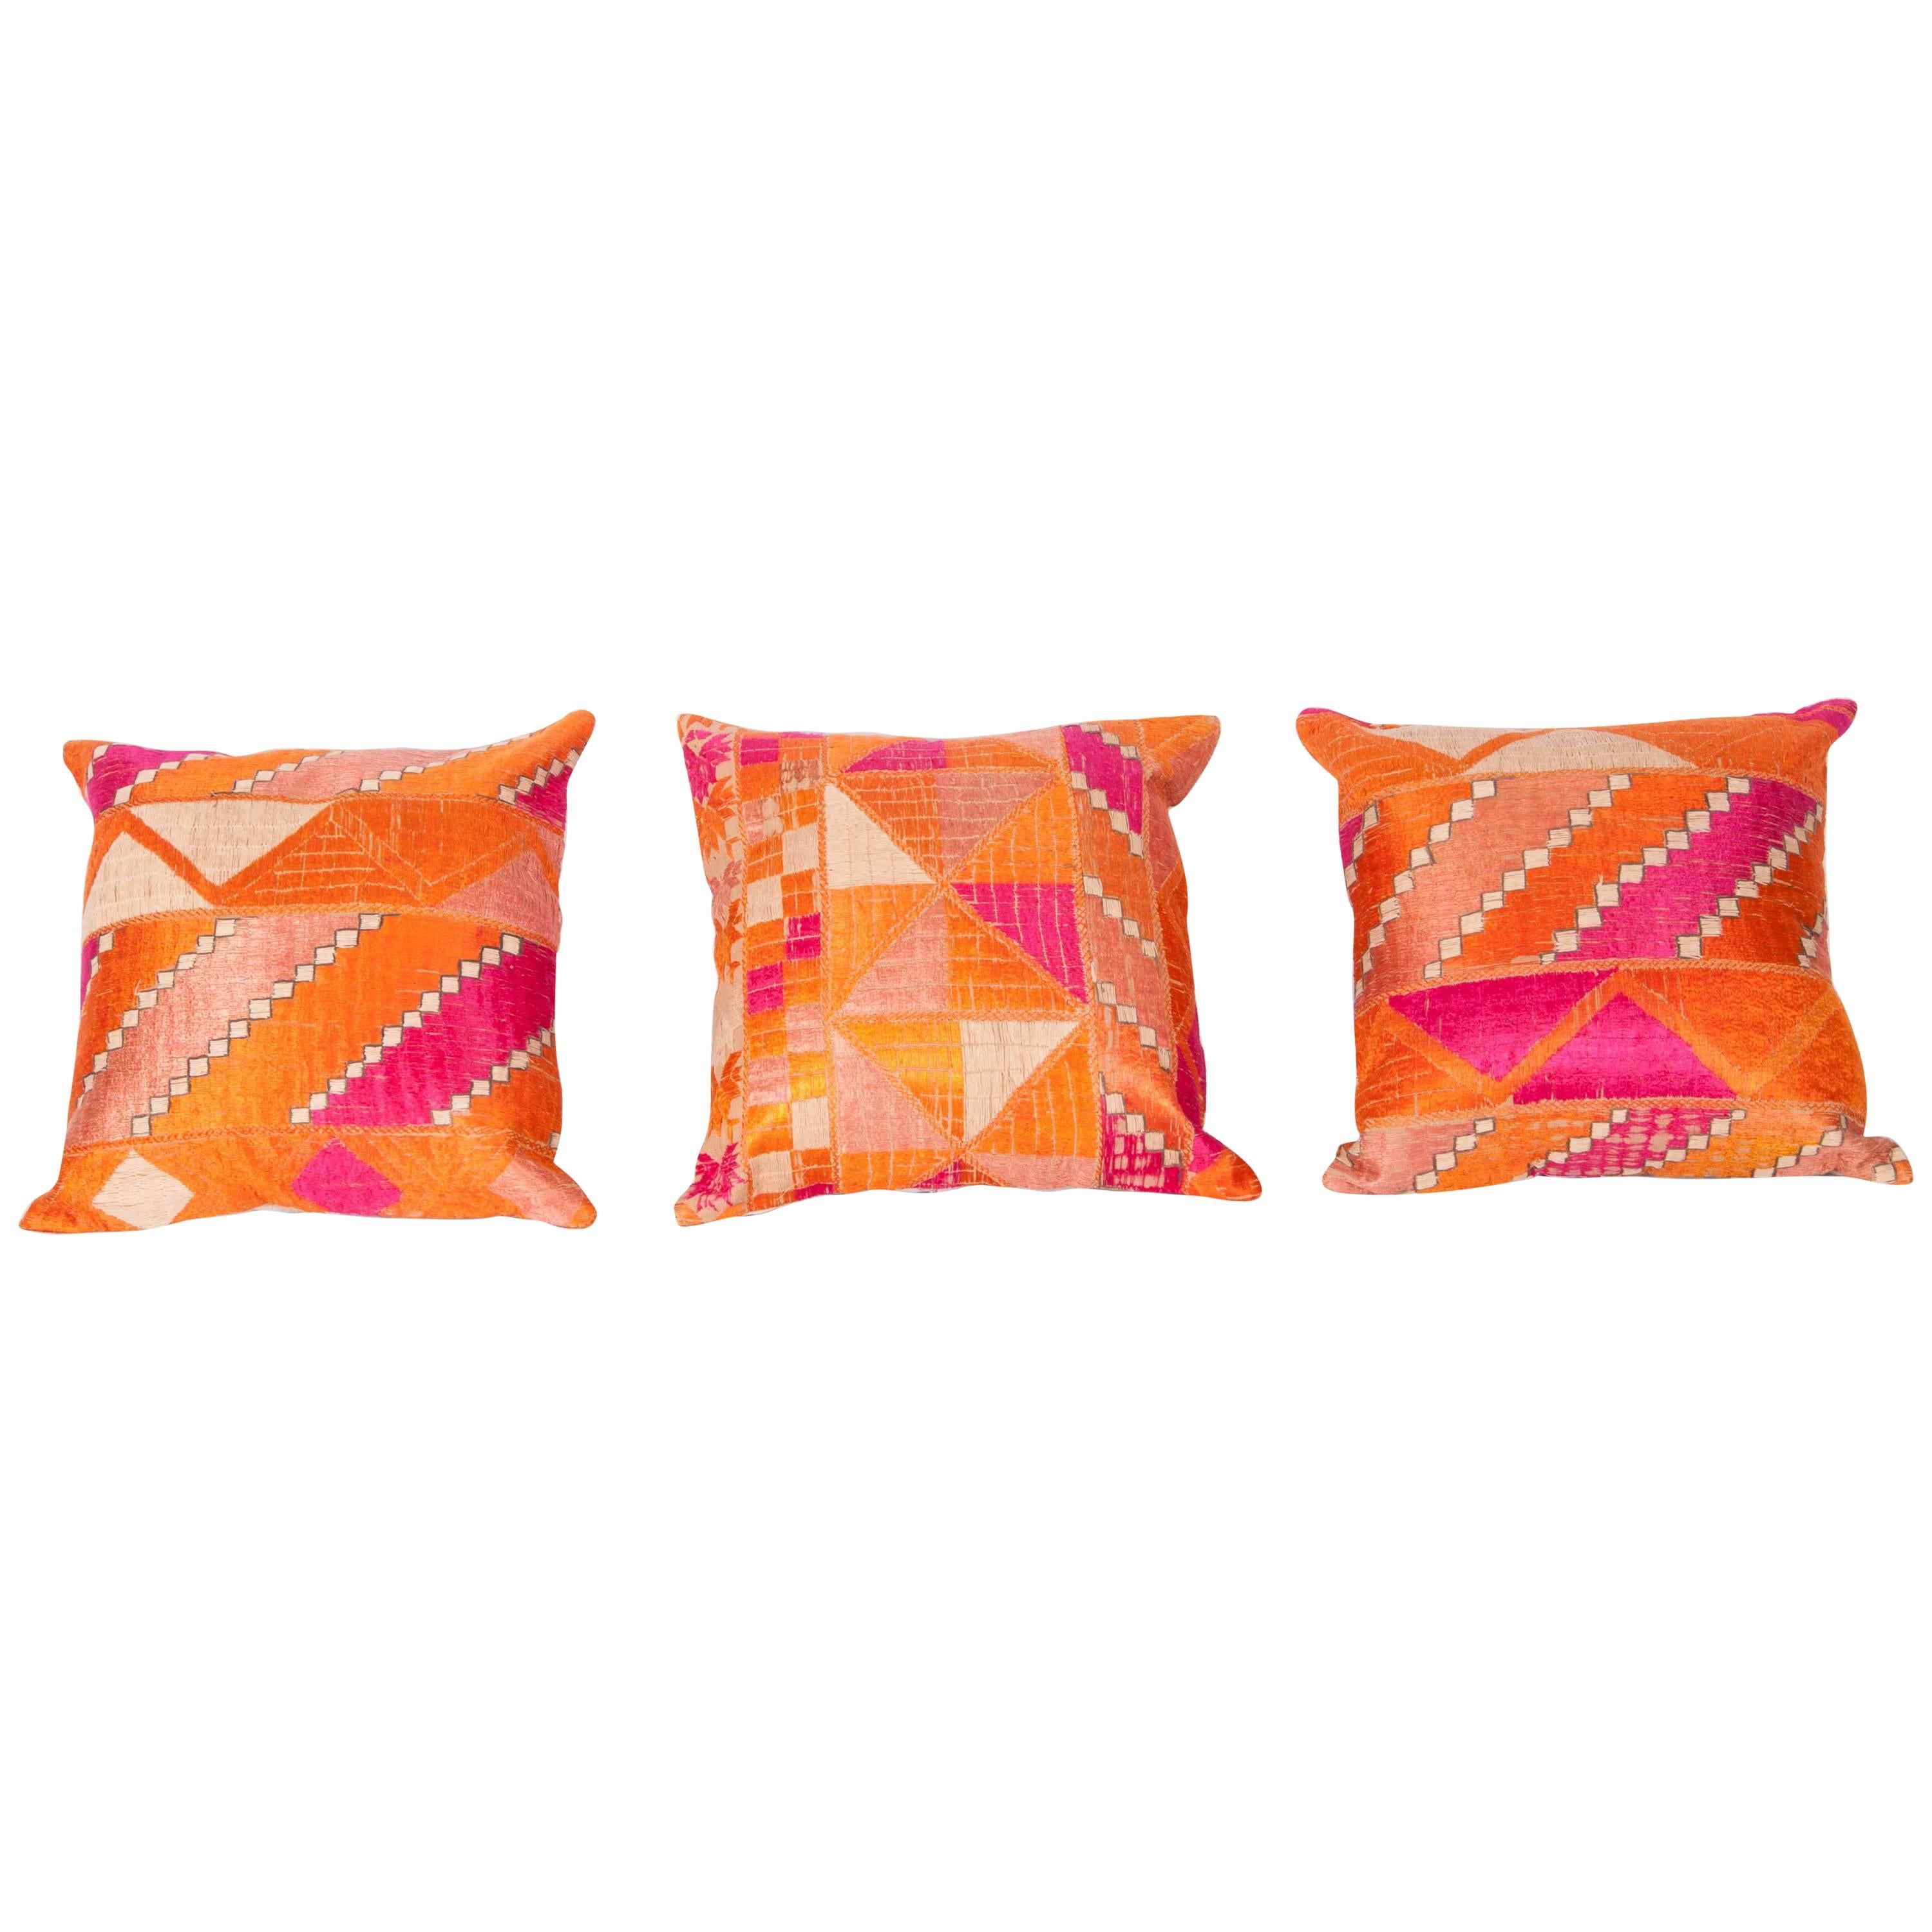 Old Phulkari Pillow Cases from India